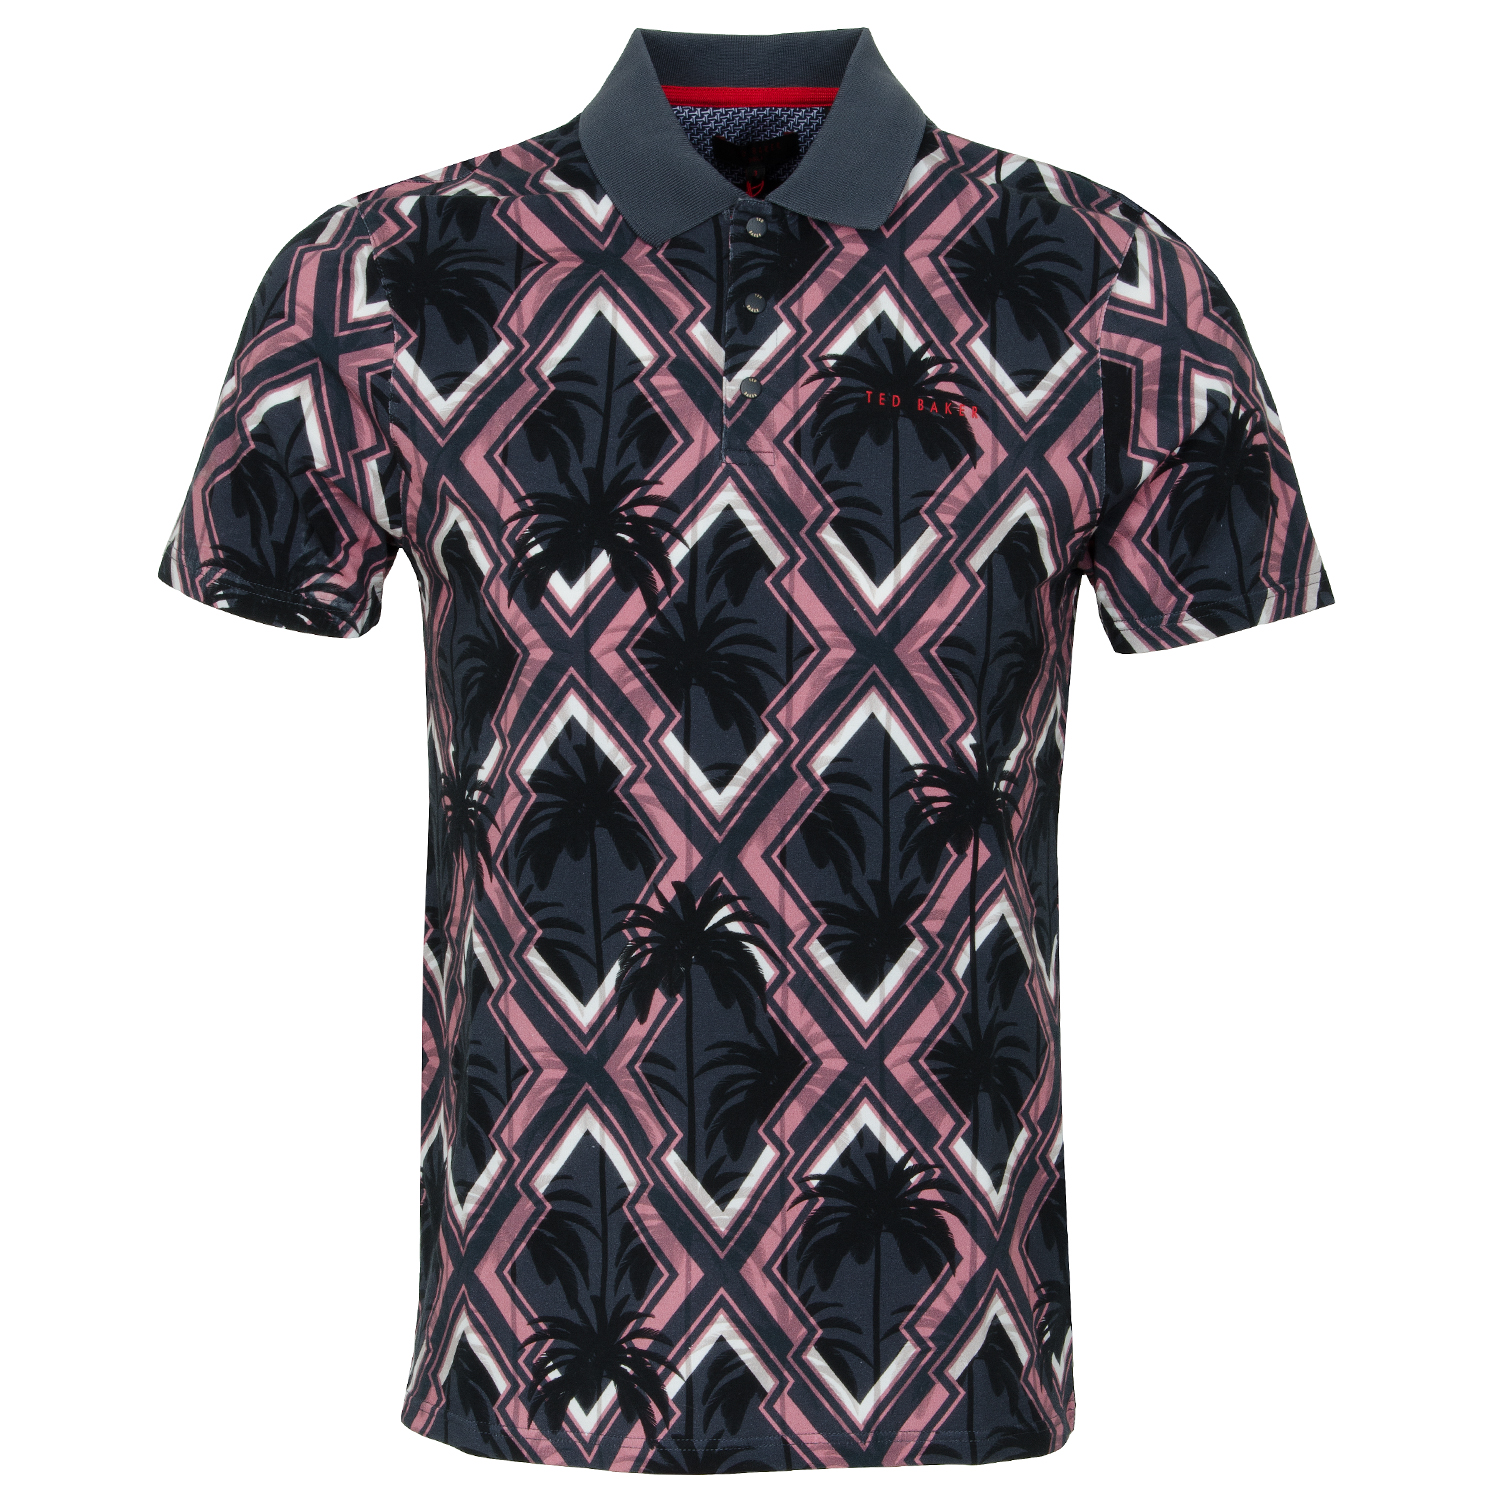 Ted Baker Gilbeys Polo Shirt Pink | Scottsdale Golf